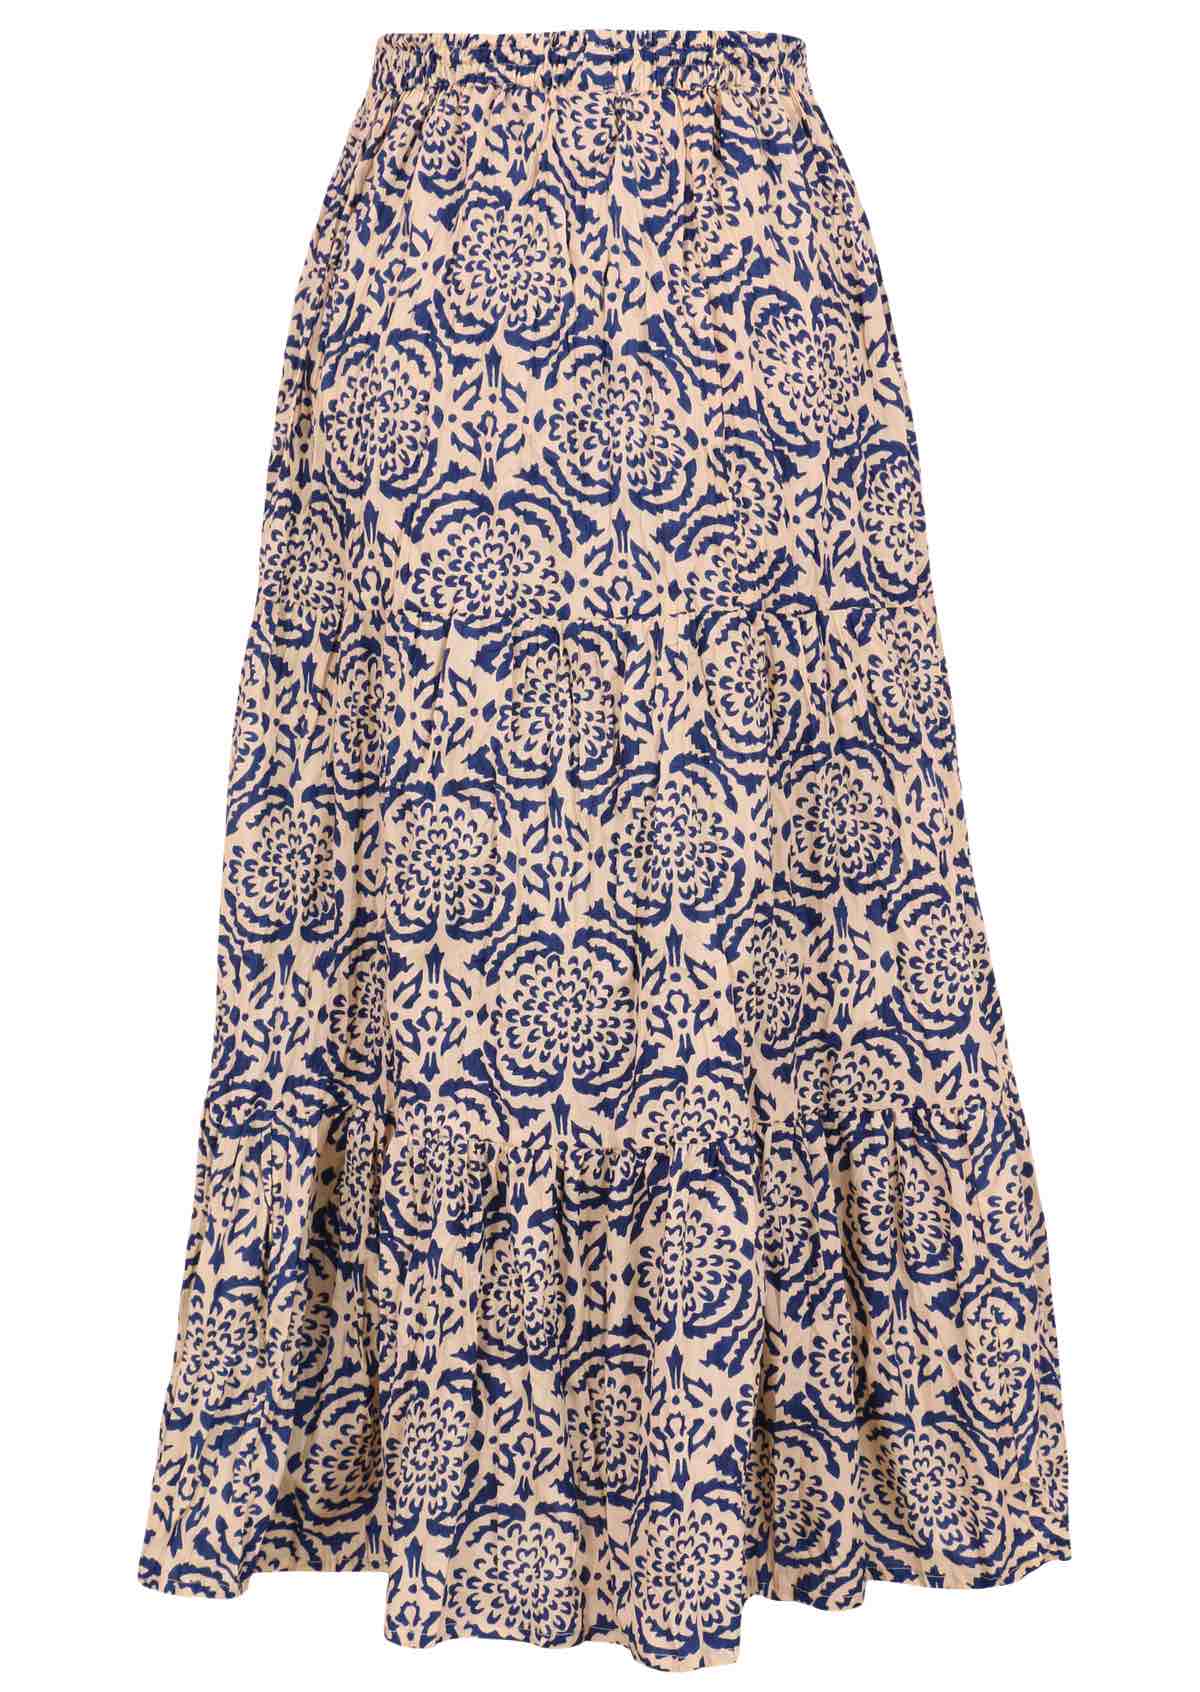 Maxi skirt with blue floral stamped print on cream base